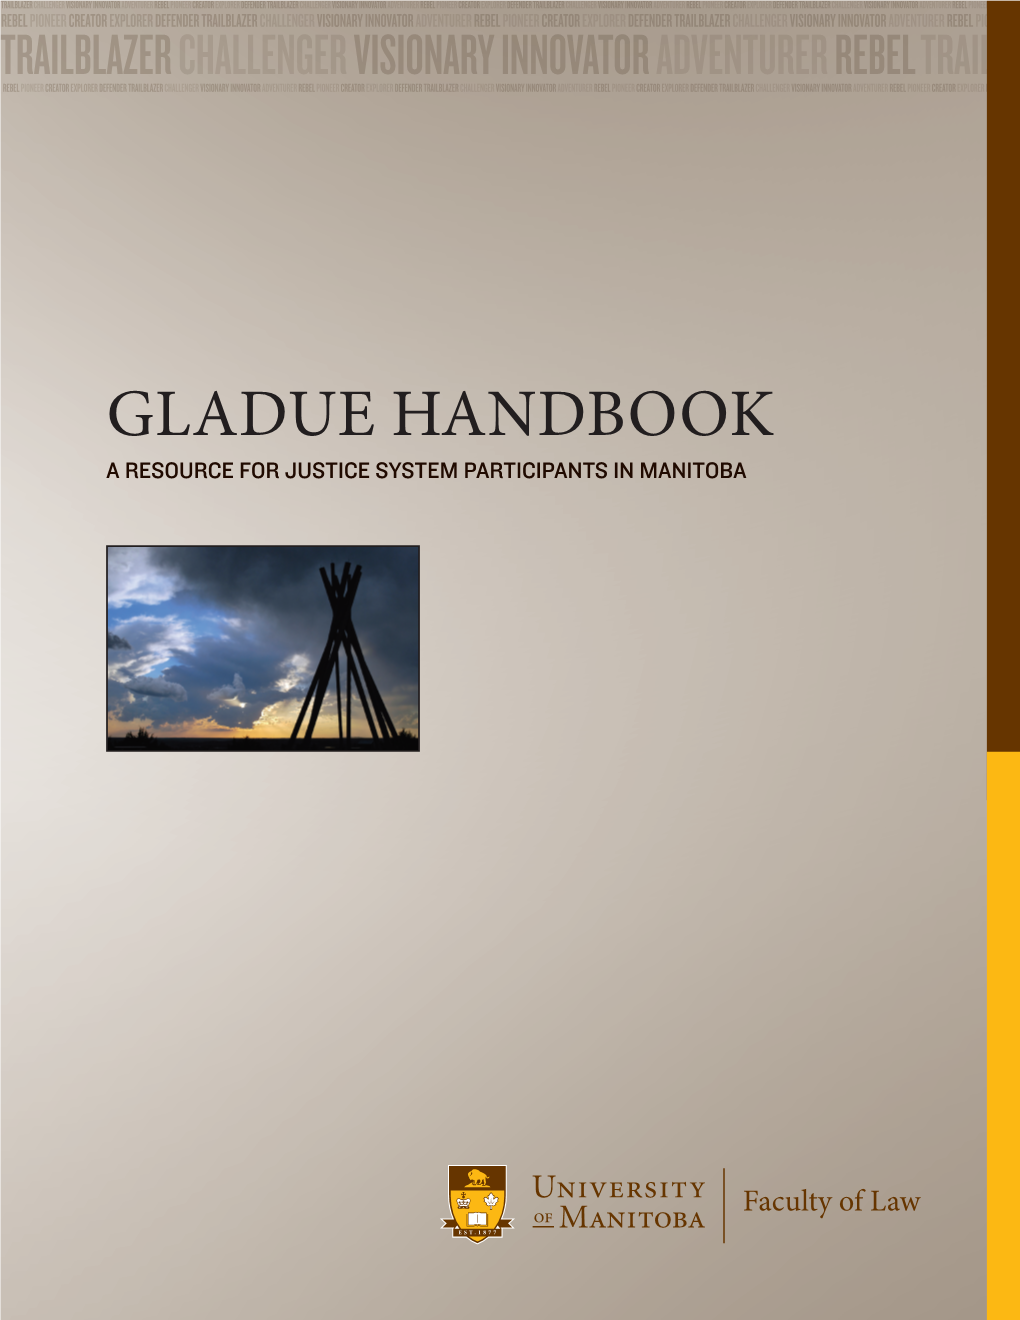 Gladue Handbook a RESOURCE for JUSTICE SYSTEM PARTICIPANTS in MANITOBA